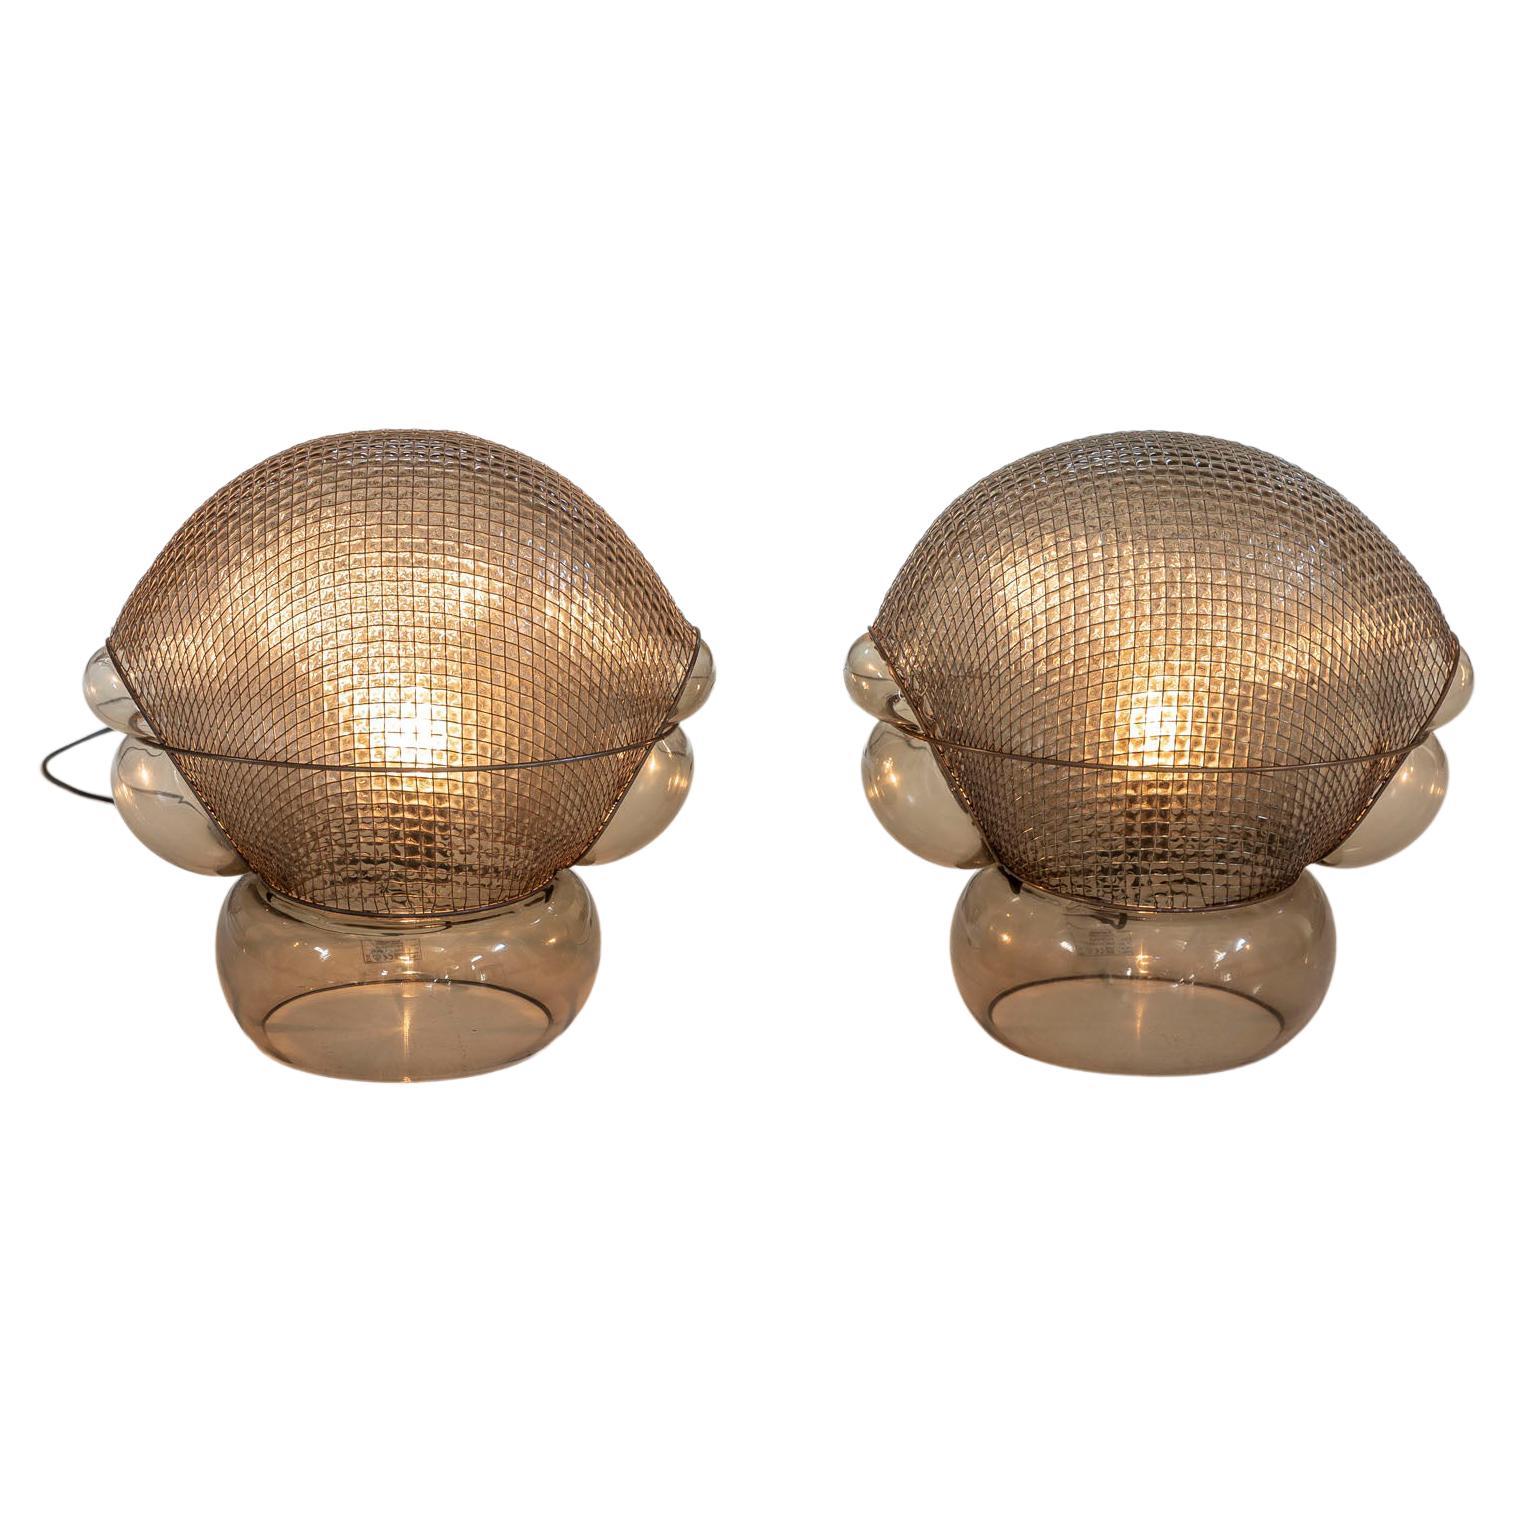 Pair of Patroclo Table Lamps  by Gae Aulenti for Artemide